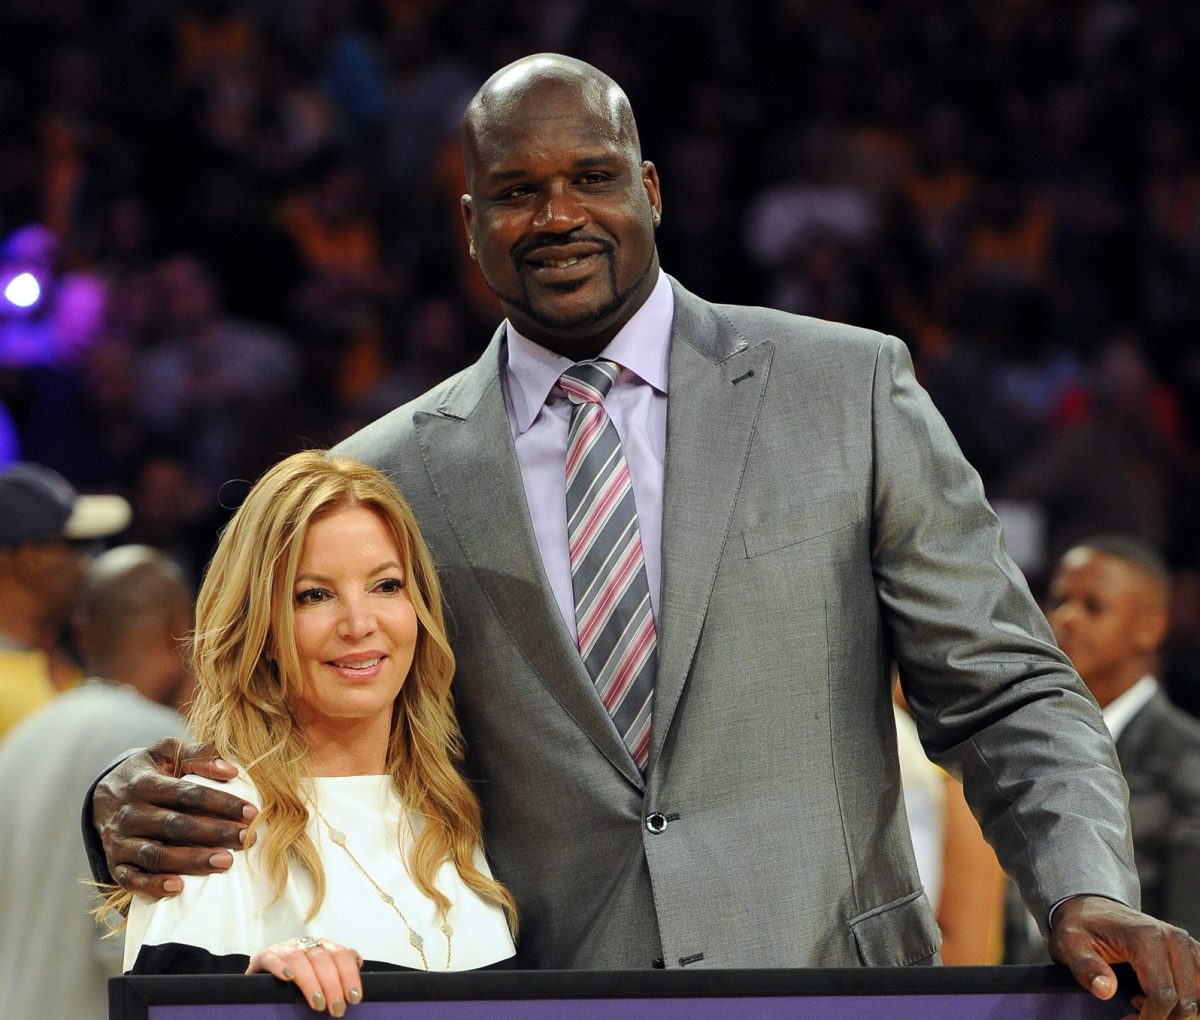 Jeanie Buss and Shaquille O'Neal